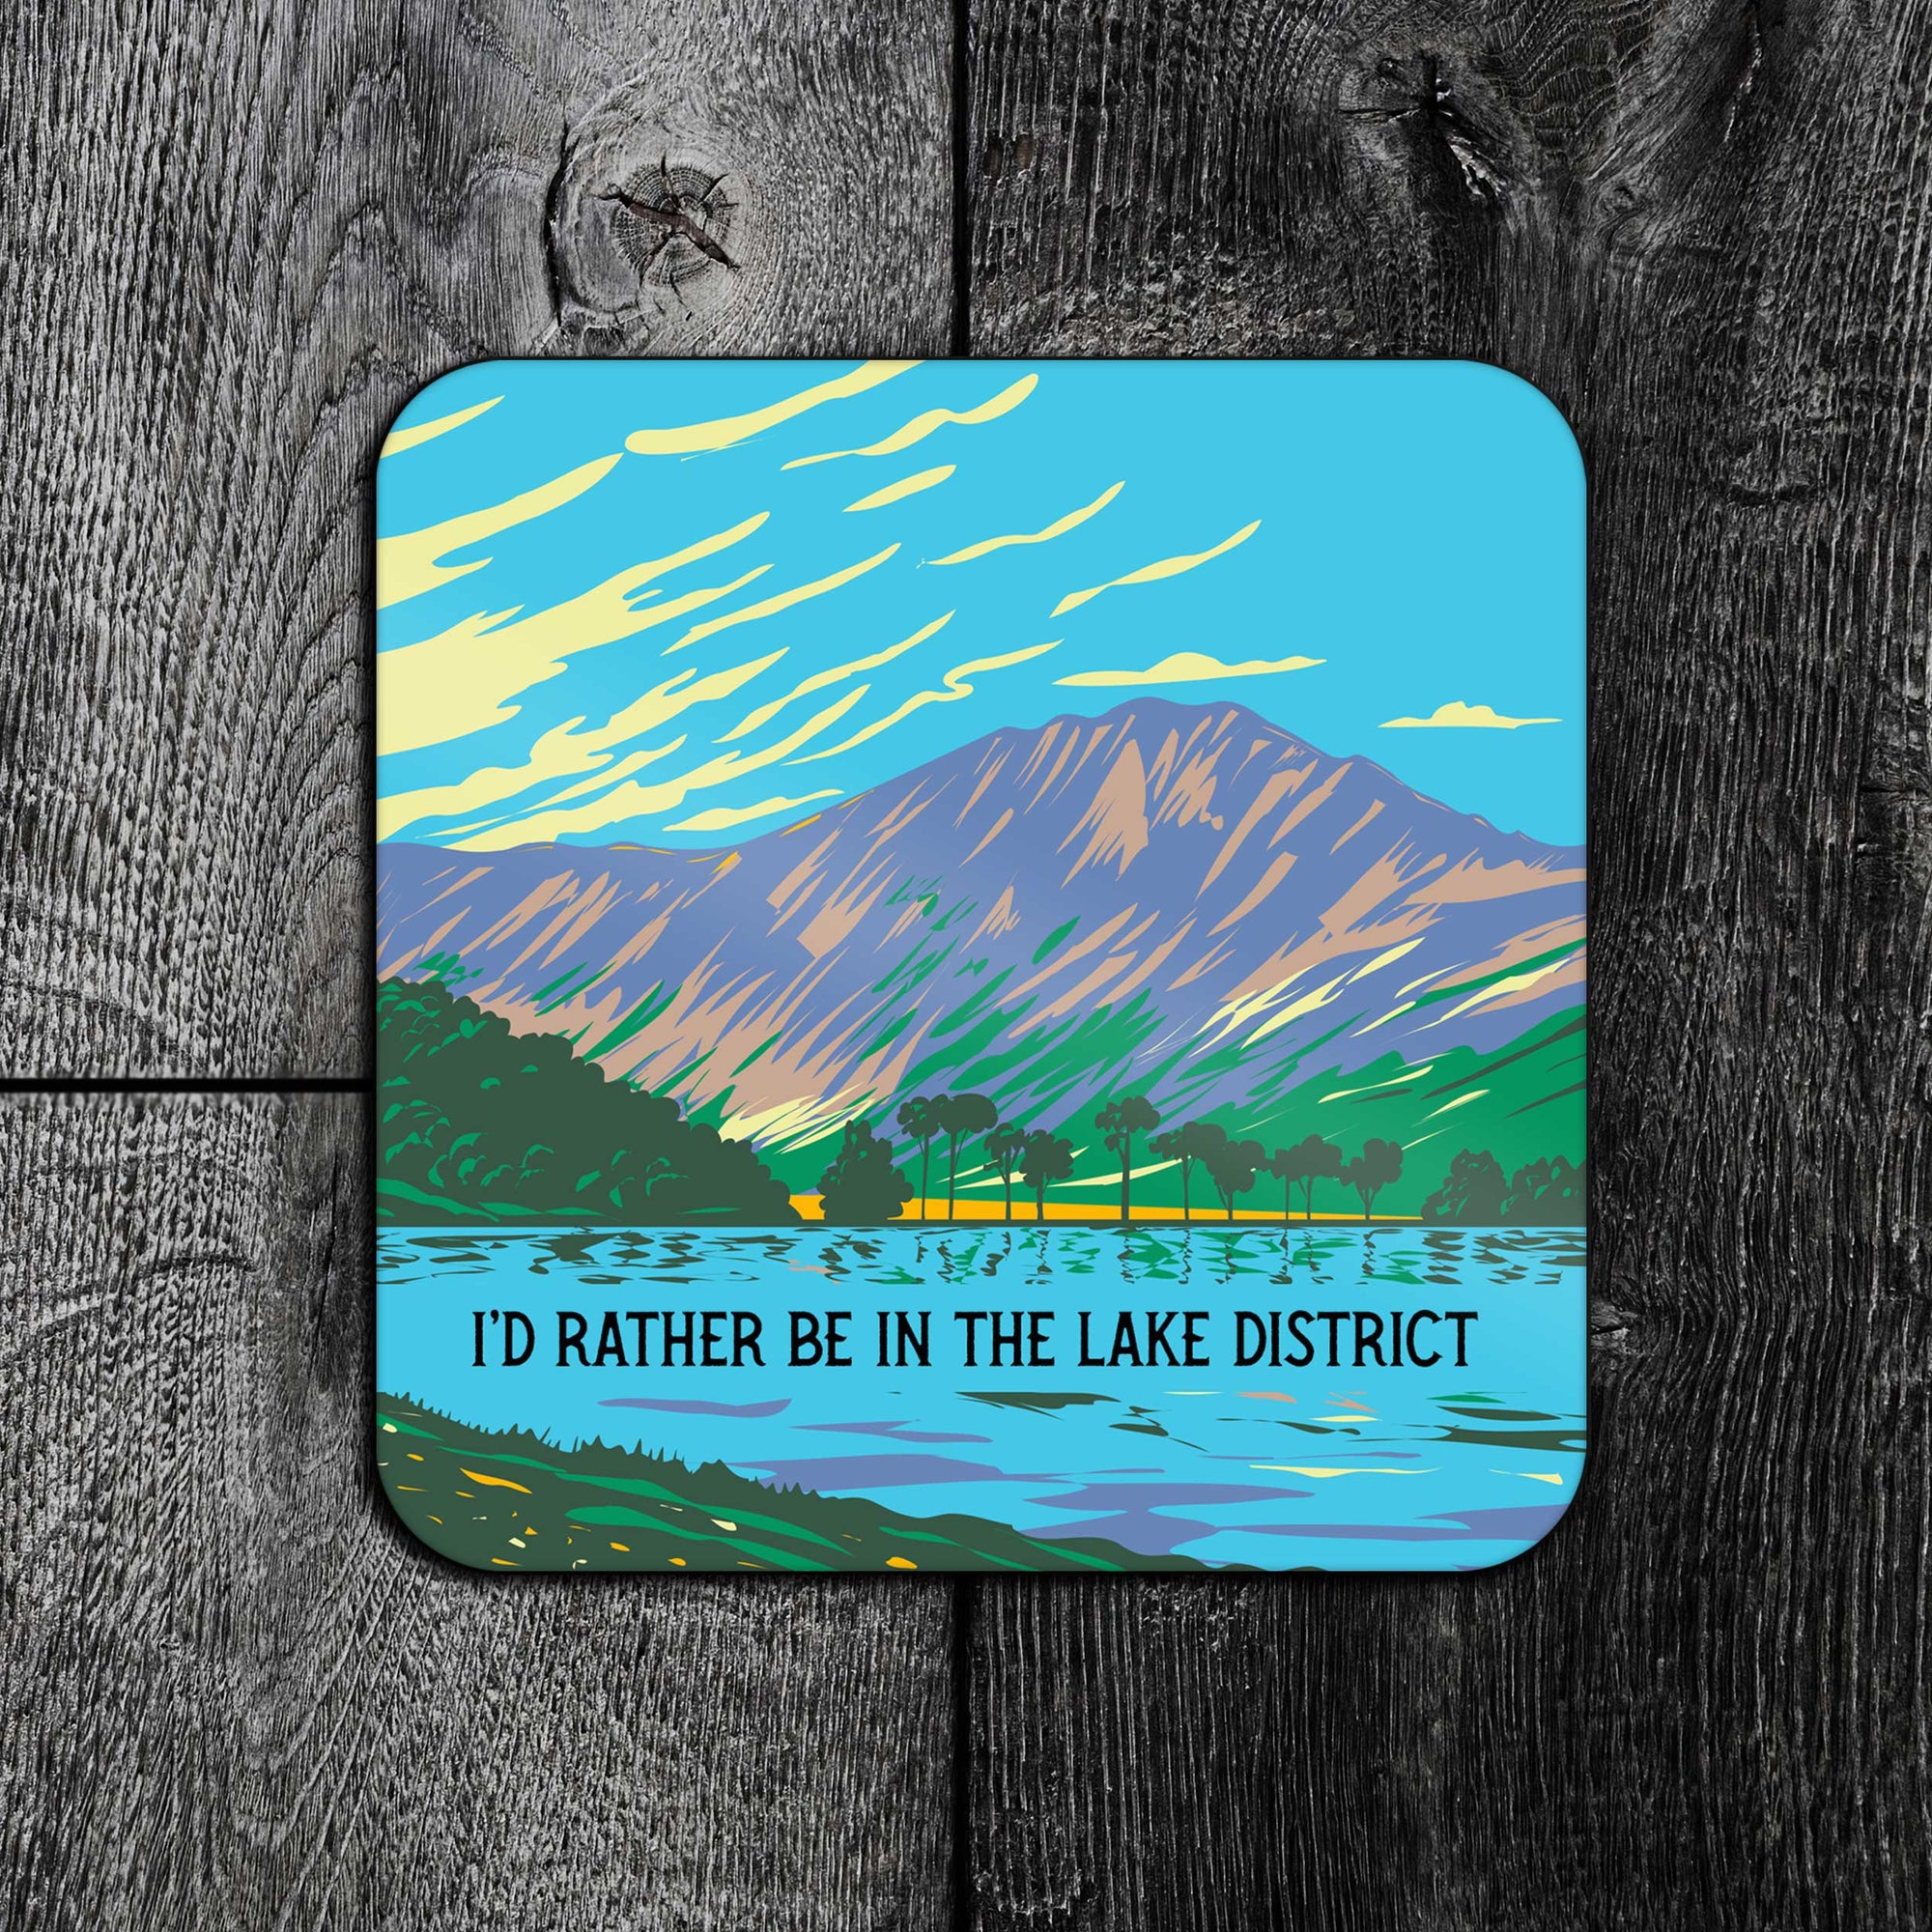 I'd Rather Be In The Lake District Coaster - Buttermere Coaster